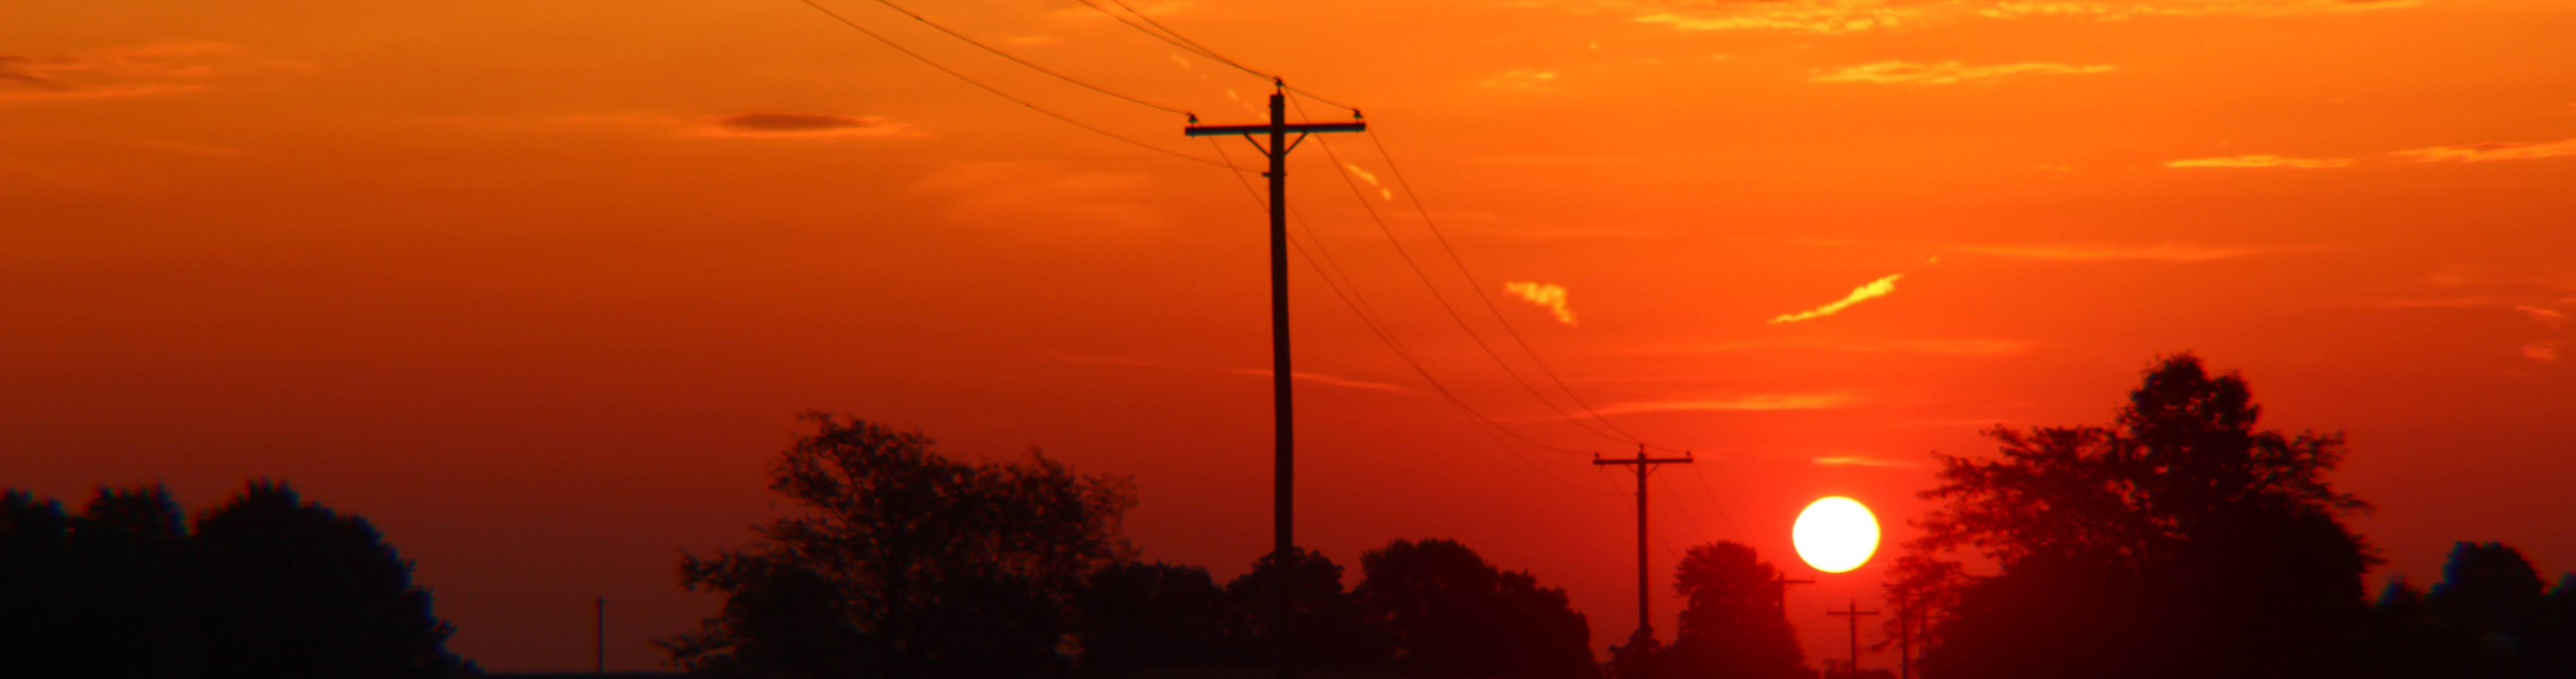 Sunrise with power lines